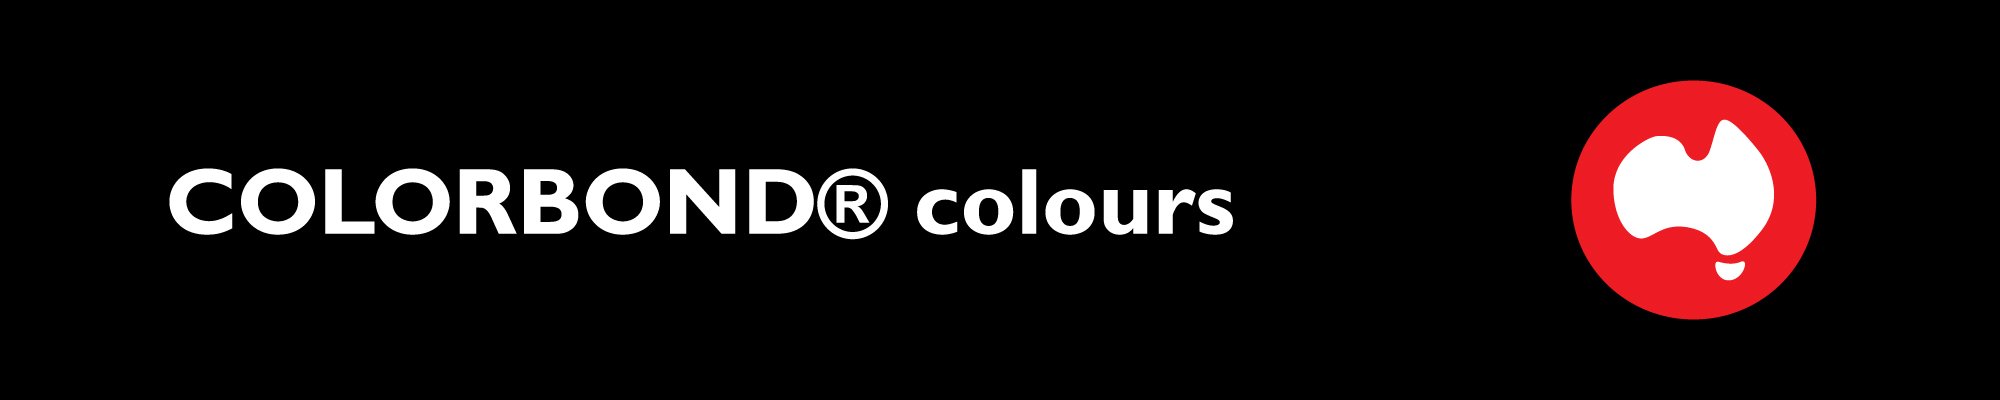 Colorbond-manor-red-sump